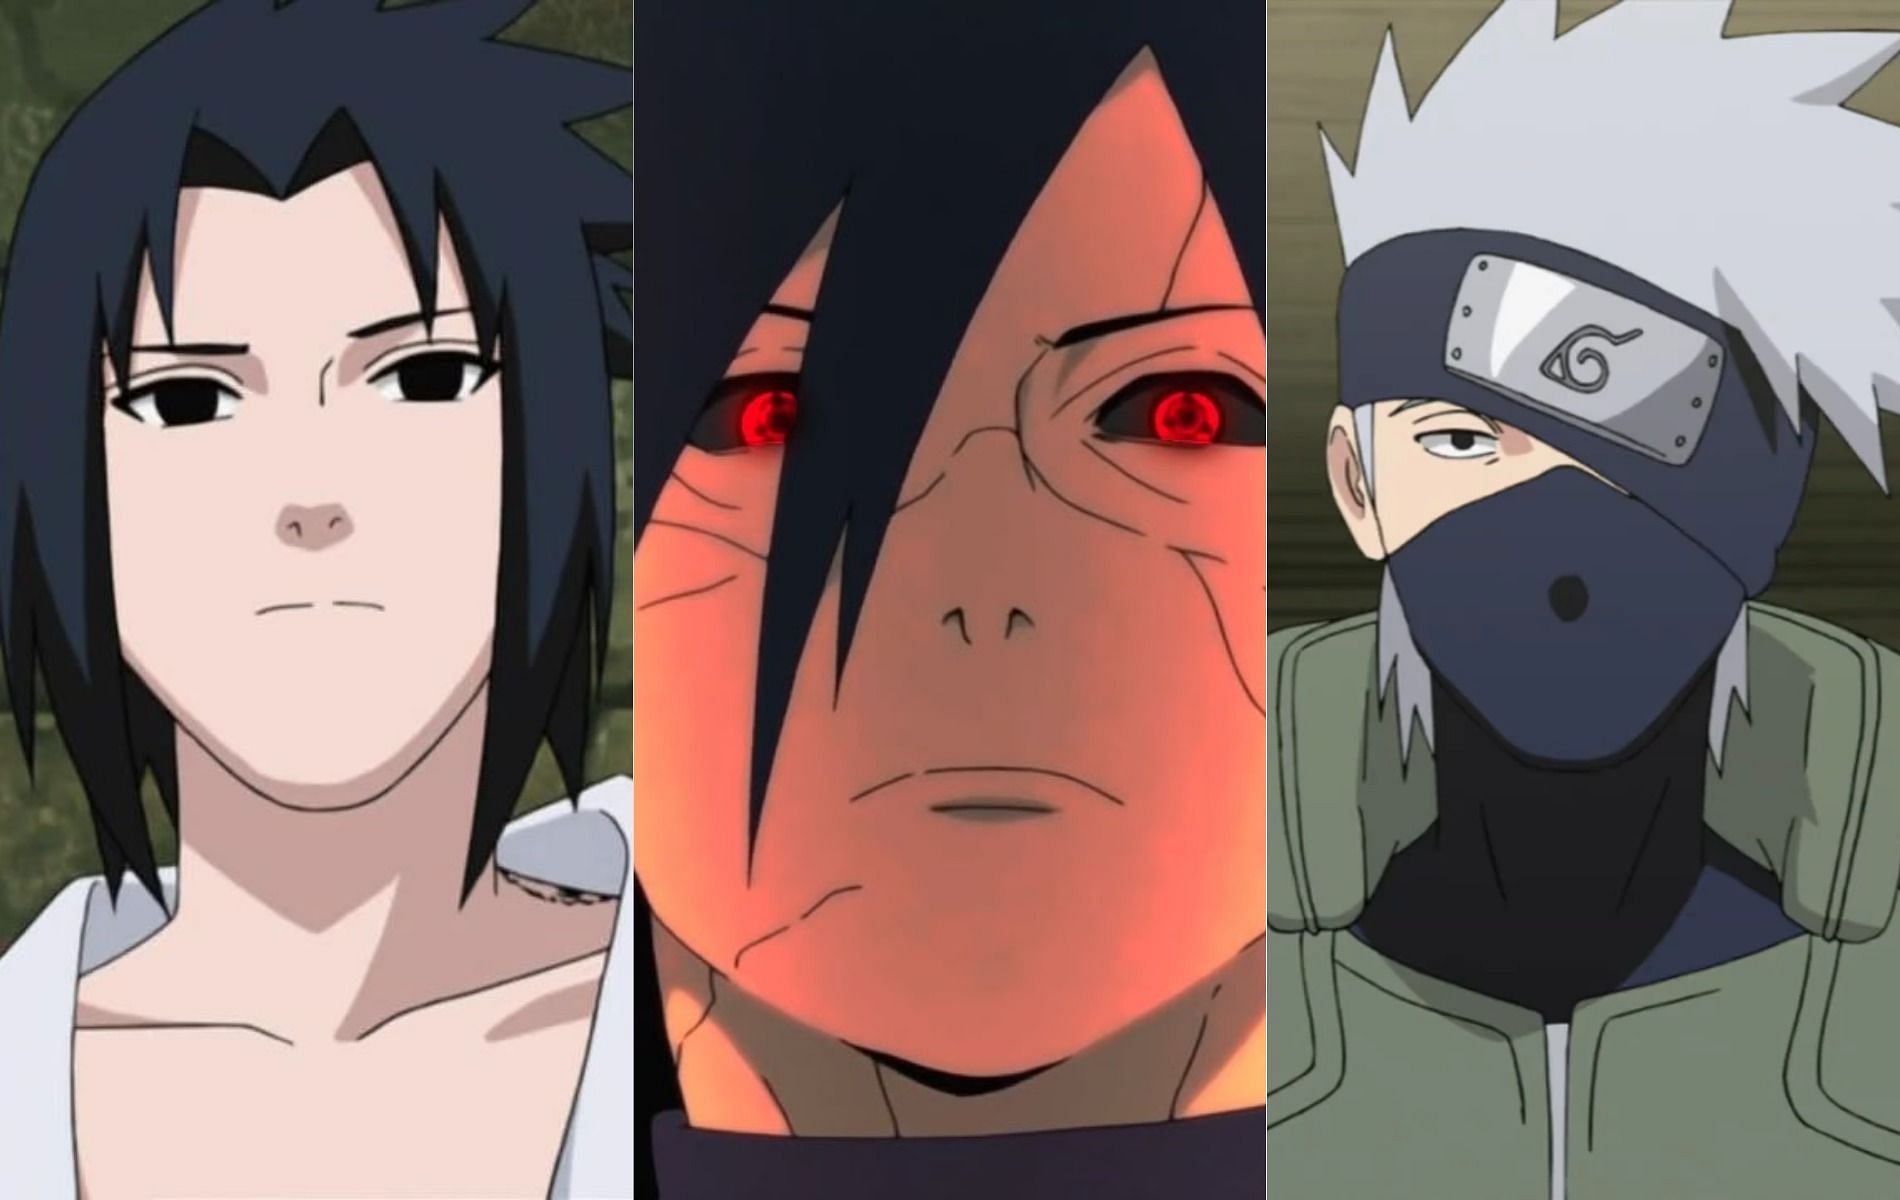 Naruto characters are considered to be Sigma males or Lone Wolfs (Images via Naruto)